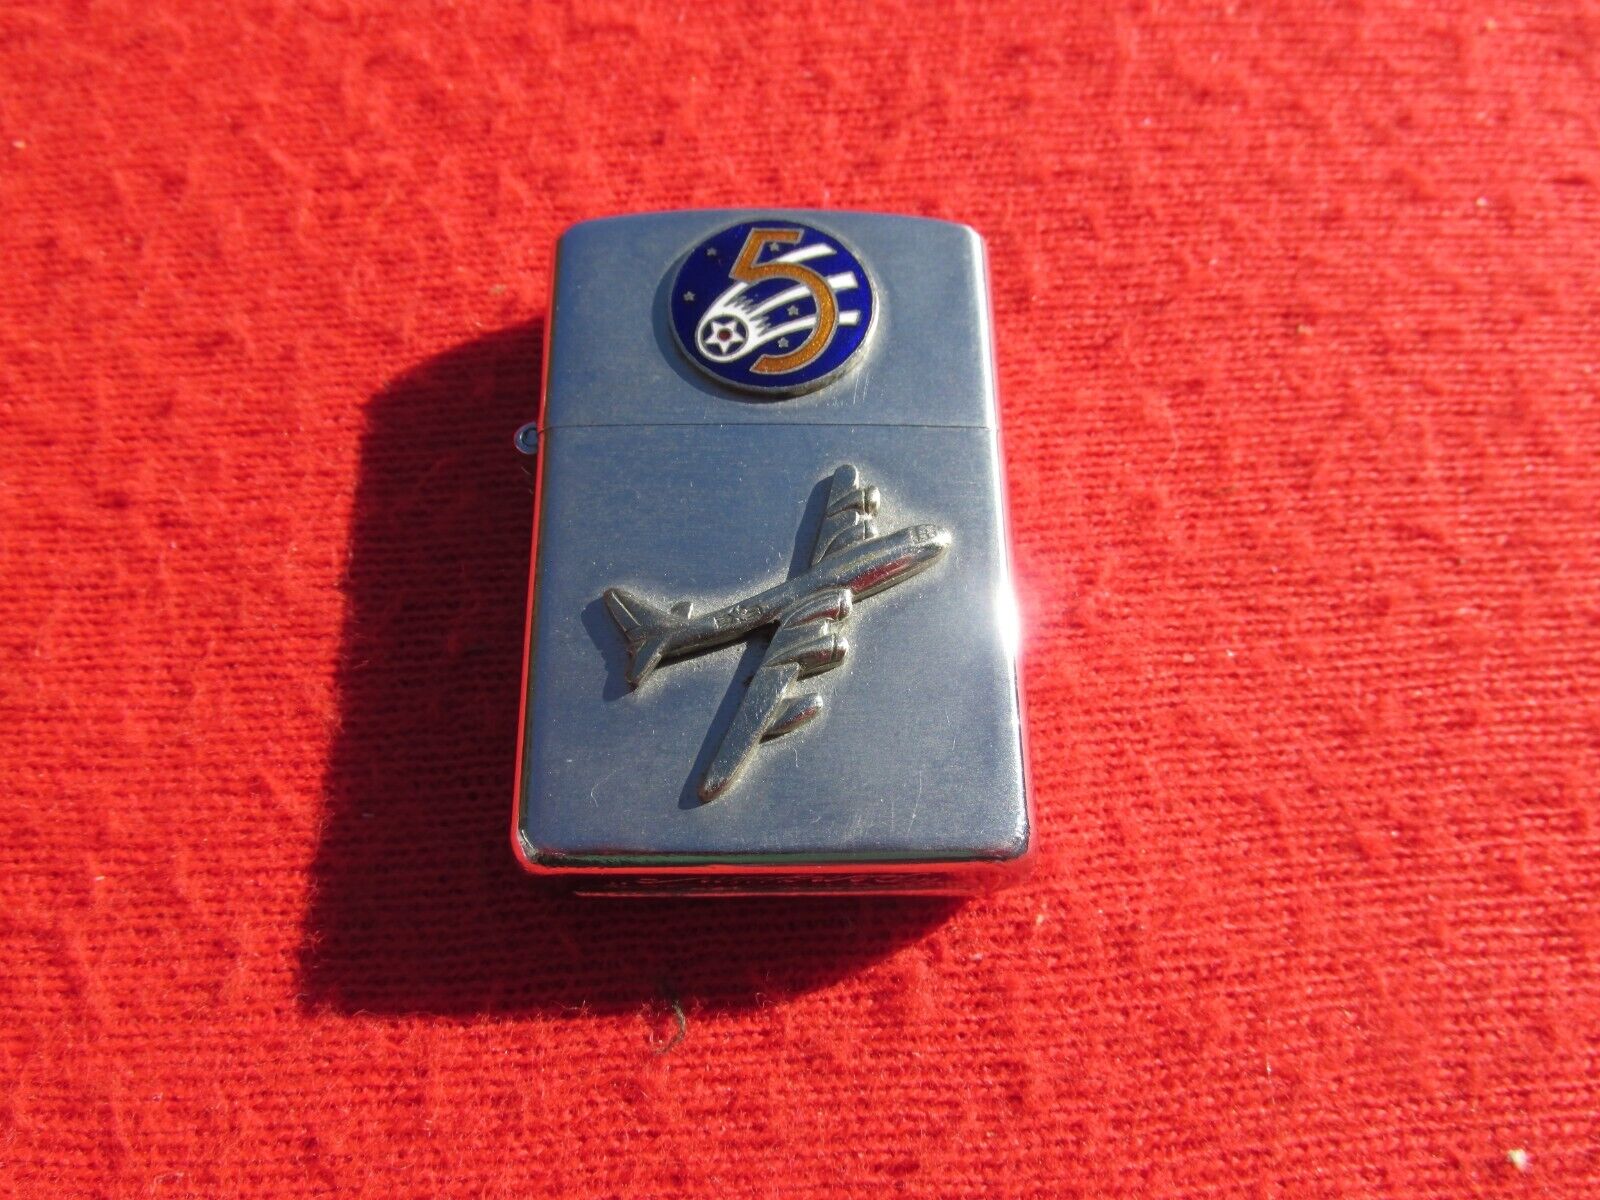 Vintage Penguin Lighter  5th Air Force  B-29 aircraft 5th patch